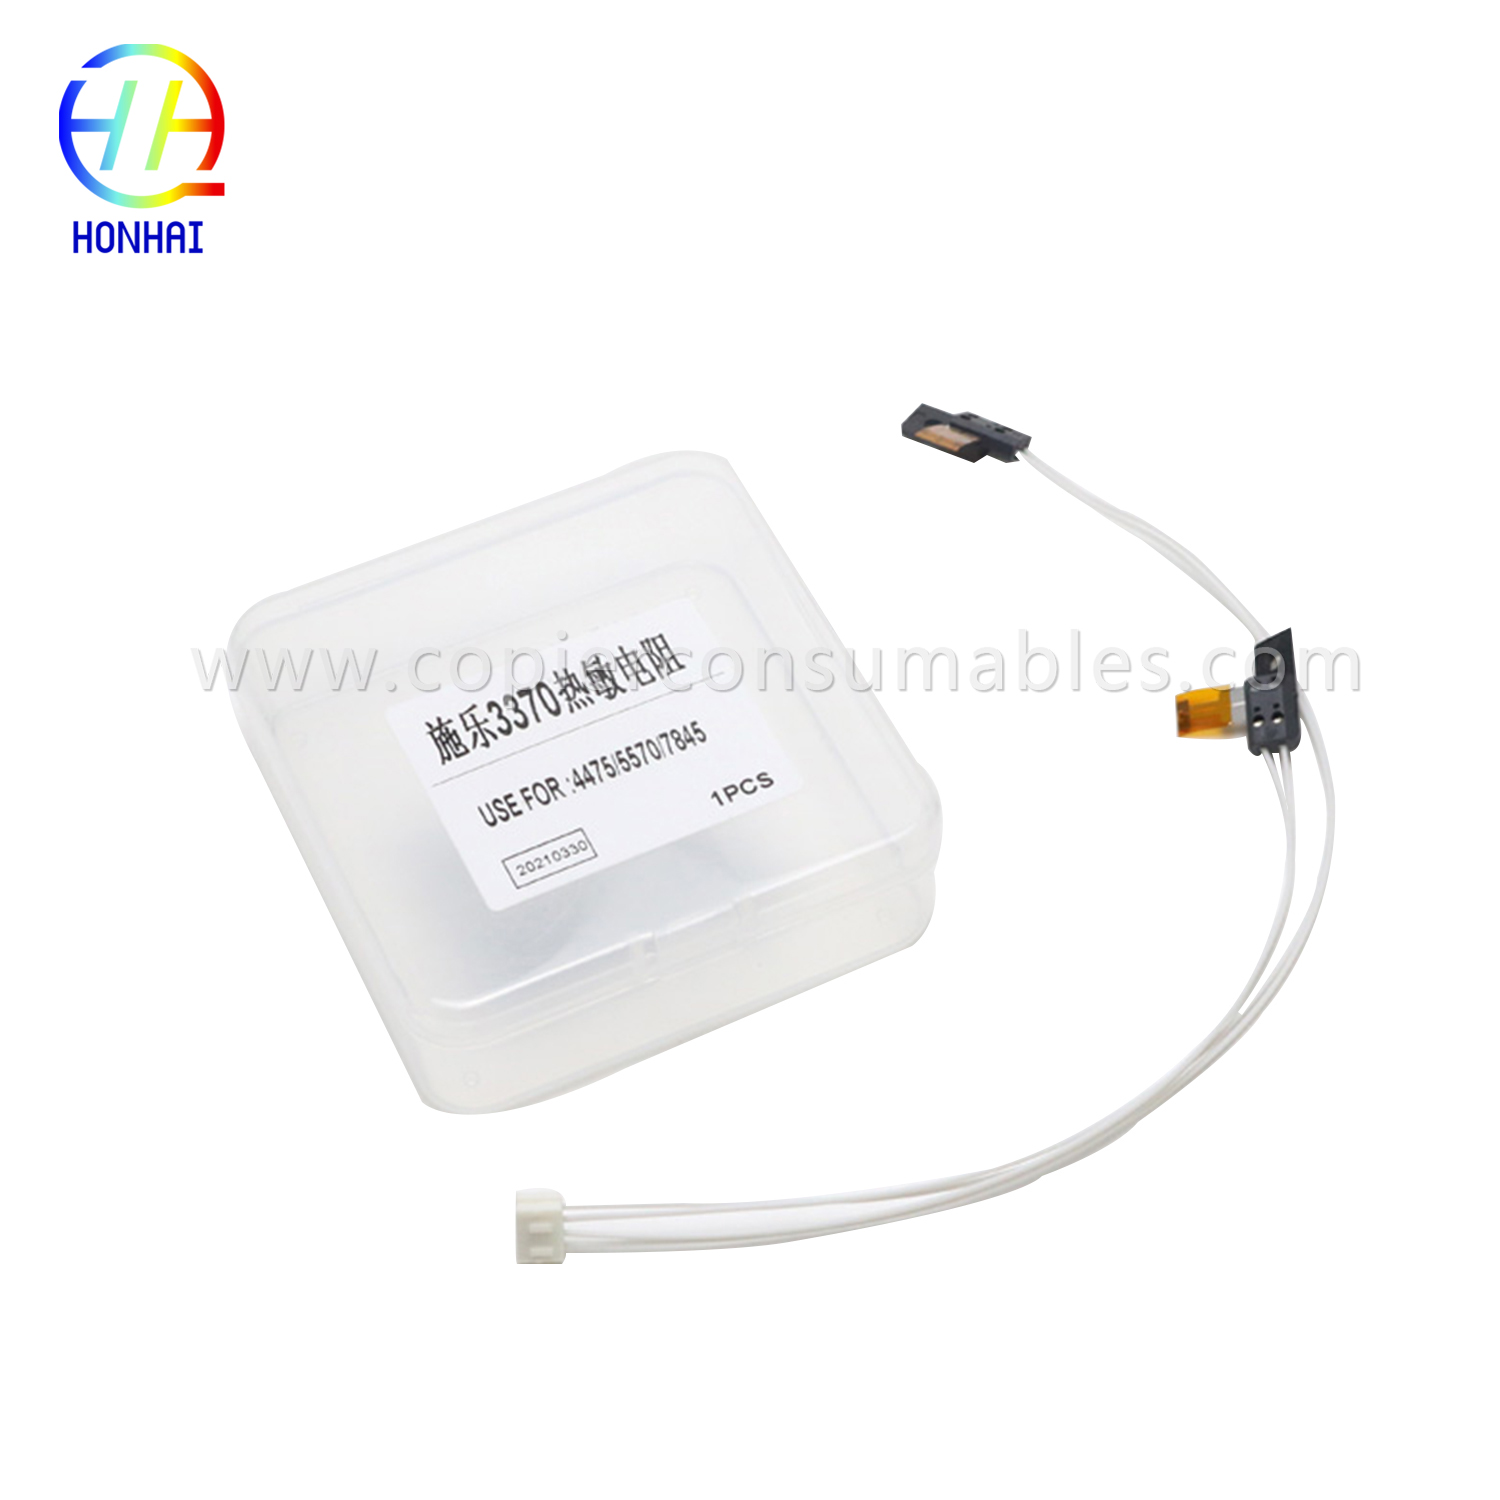 Fuser Unit Thermistor for Xerox P4 3370 3375 3373 7830 7835 7845 7855 7525 7535 7545 7556 4470 4475 5570 5575 Original Disassembly Accessories (2)